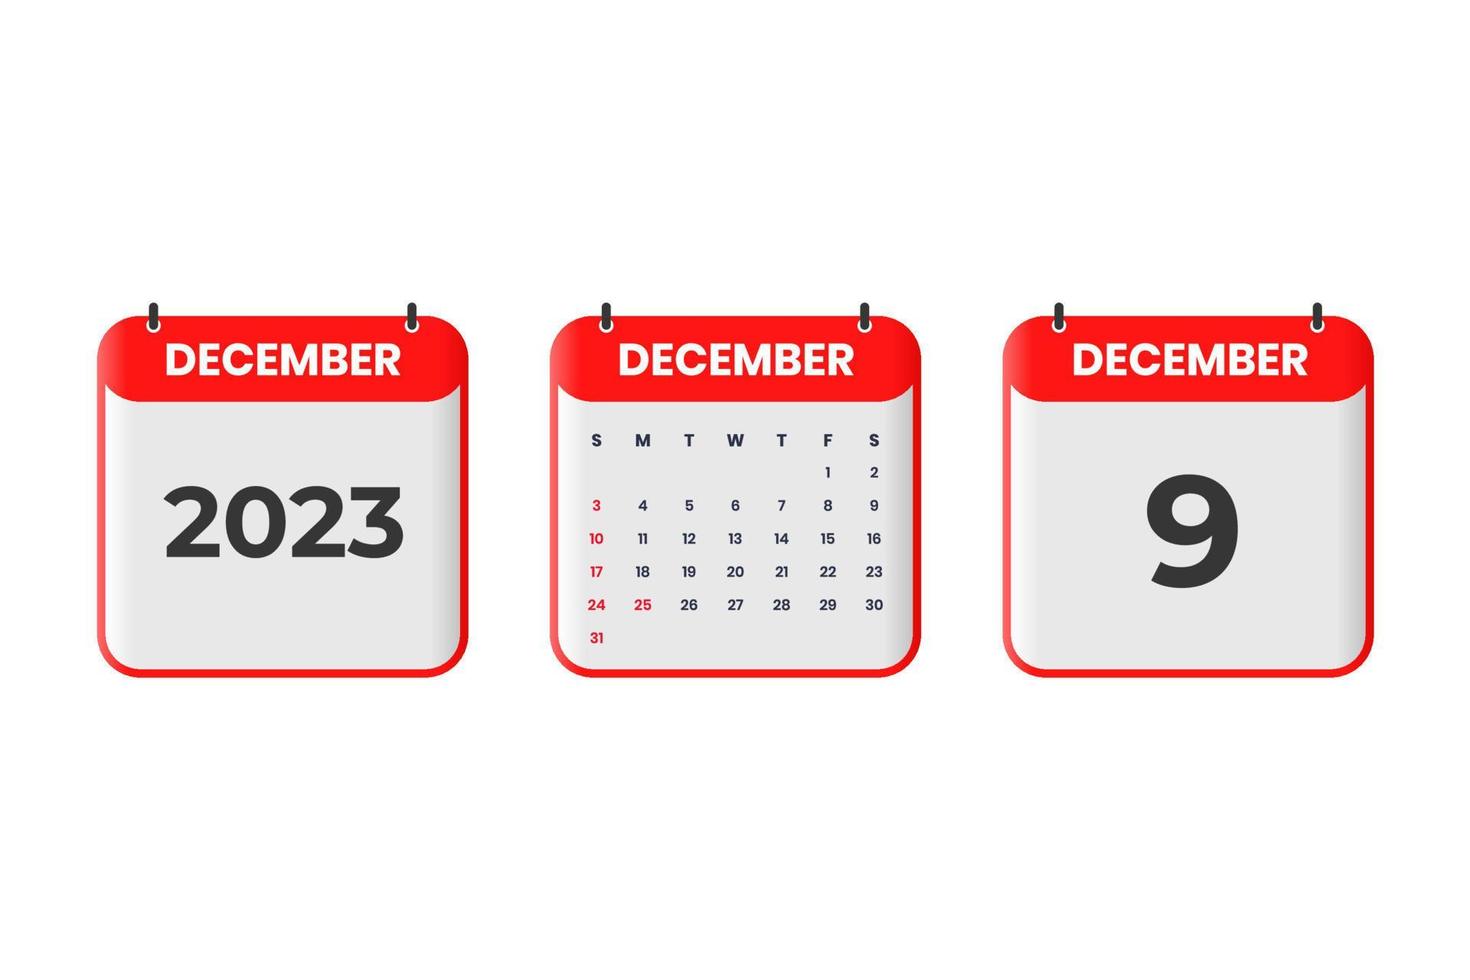 December 2023 calendar design. 9th December 2023 calendar icon for schedule, appointment, important date concept vector